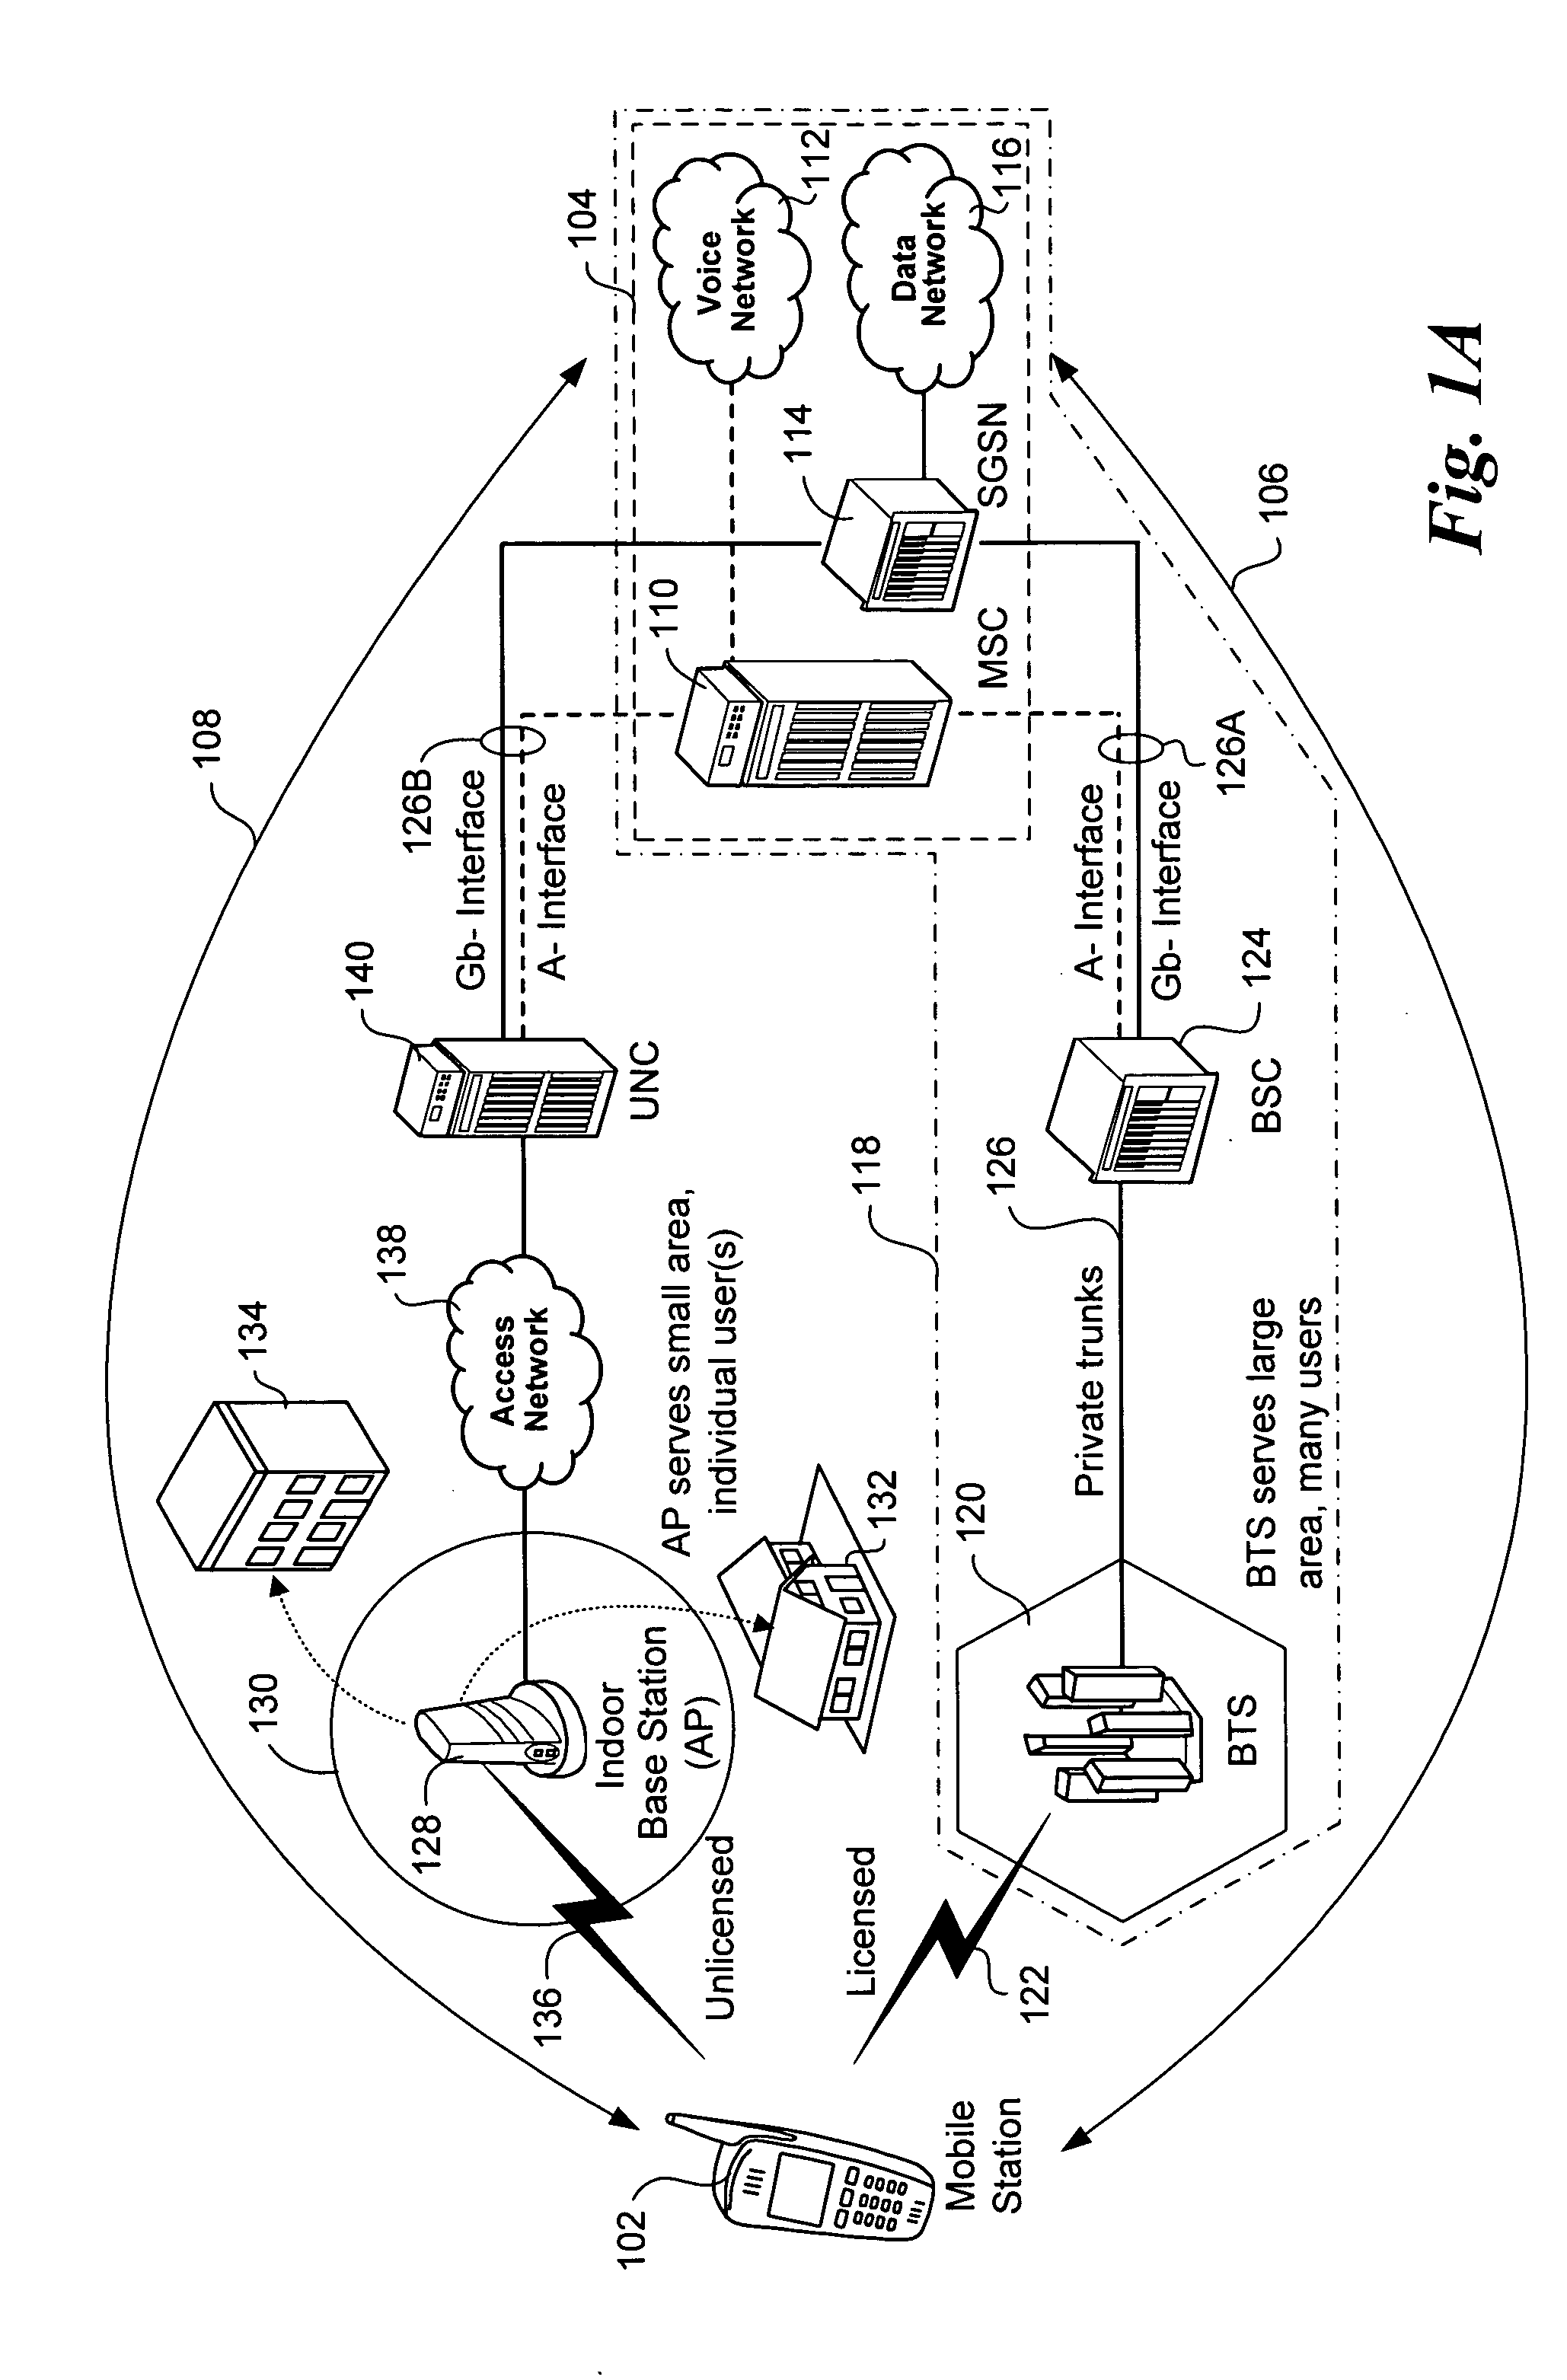 Messaging in an unlicensed mobile access telecommunications system